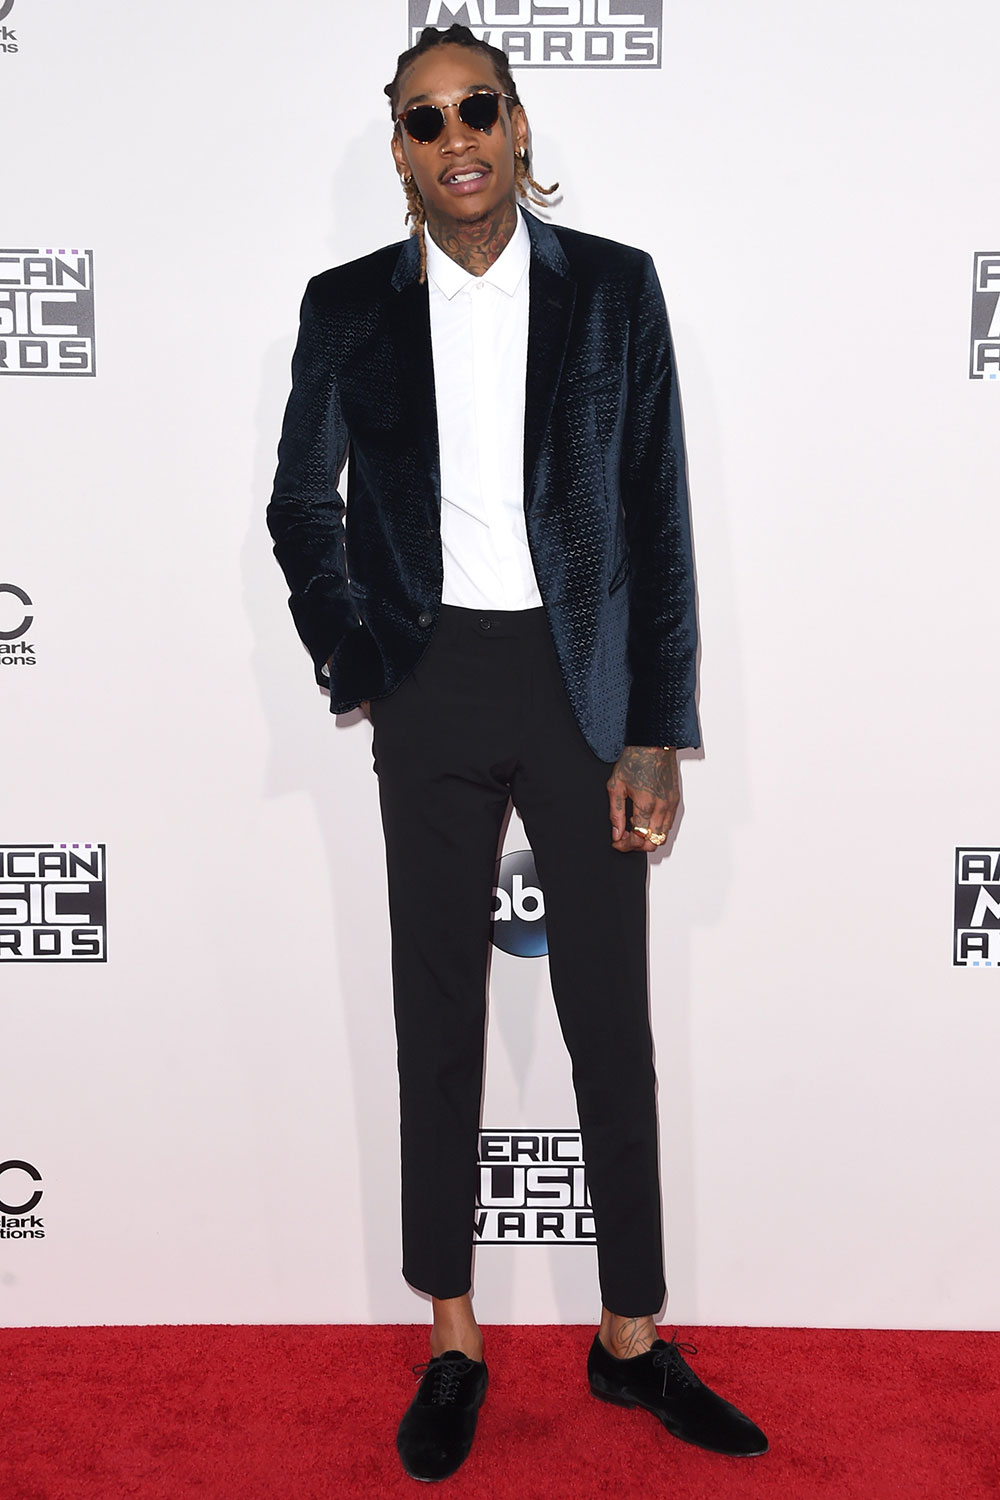 Wiz Khalifa kills it in a navy blue smoking jacket and cropped trousers.